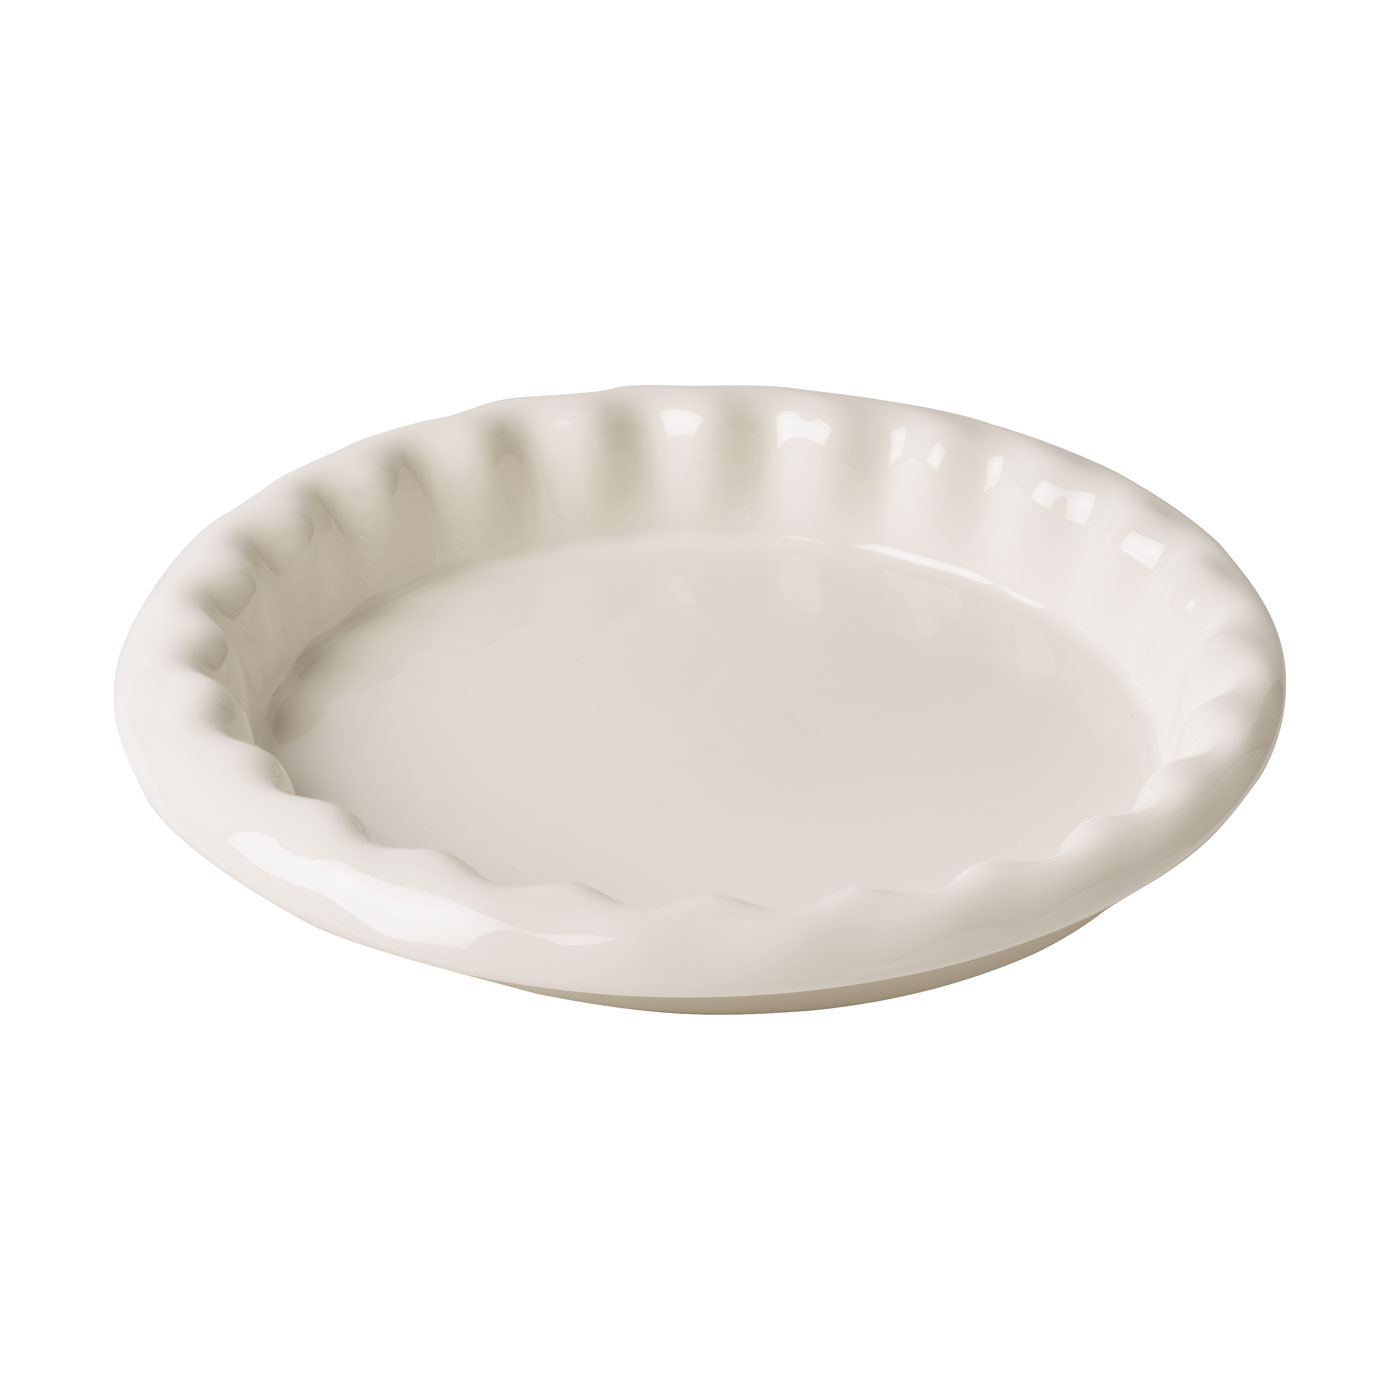 Villeroy and Boch Clever Baking Tarte Baking Dish, Single